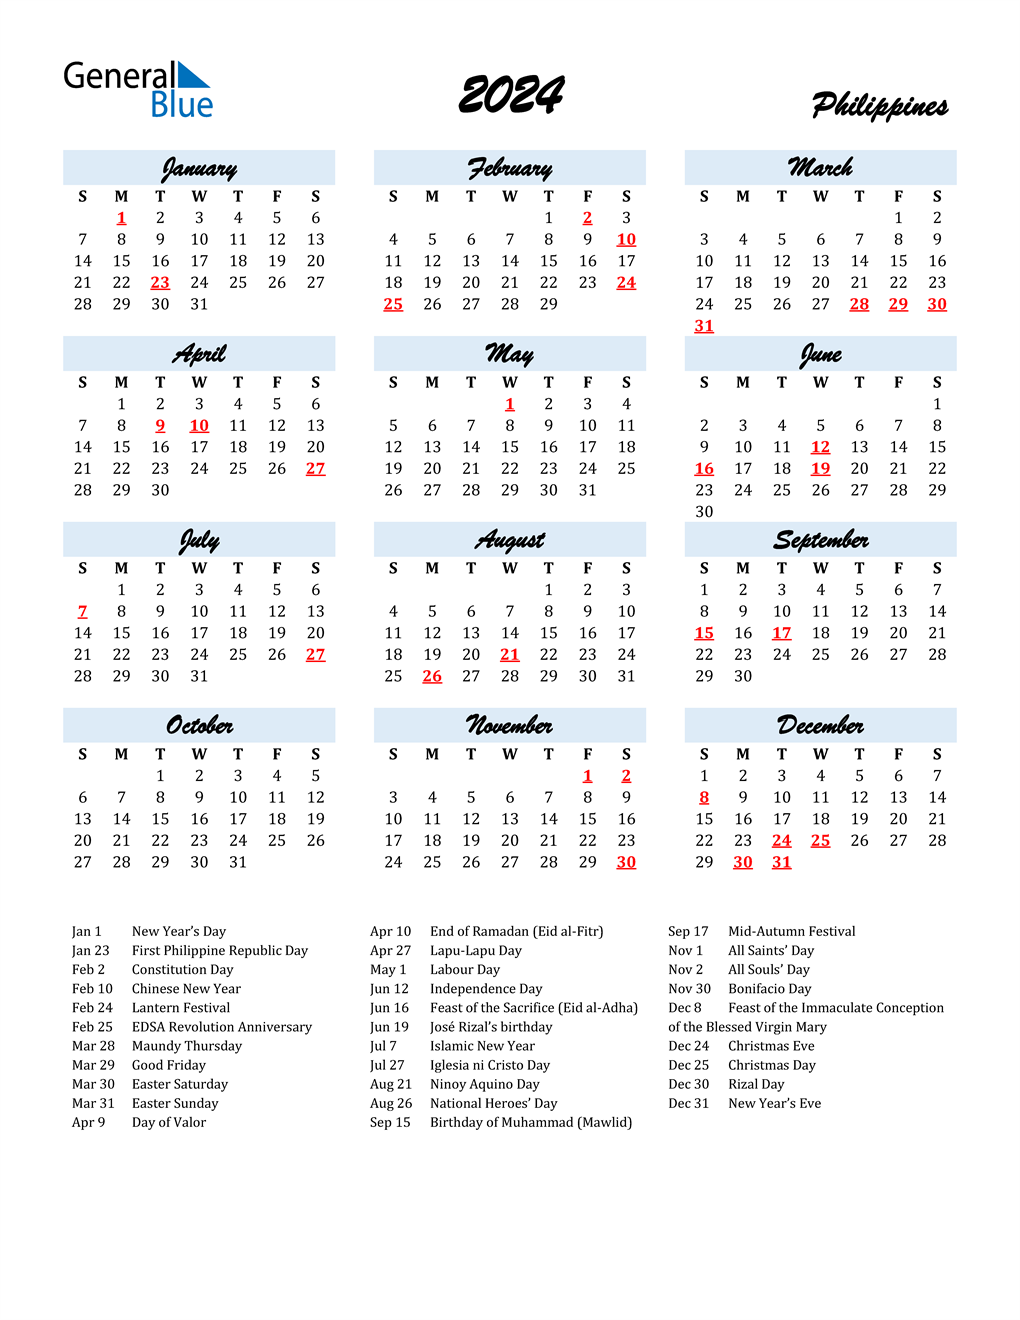 Calendar 2024 Printable Philippines With Holidays 2024 CALENDAR PRINTABLE - Free Printable 2024 Philippine Calendar With Holidays